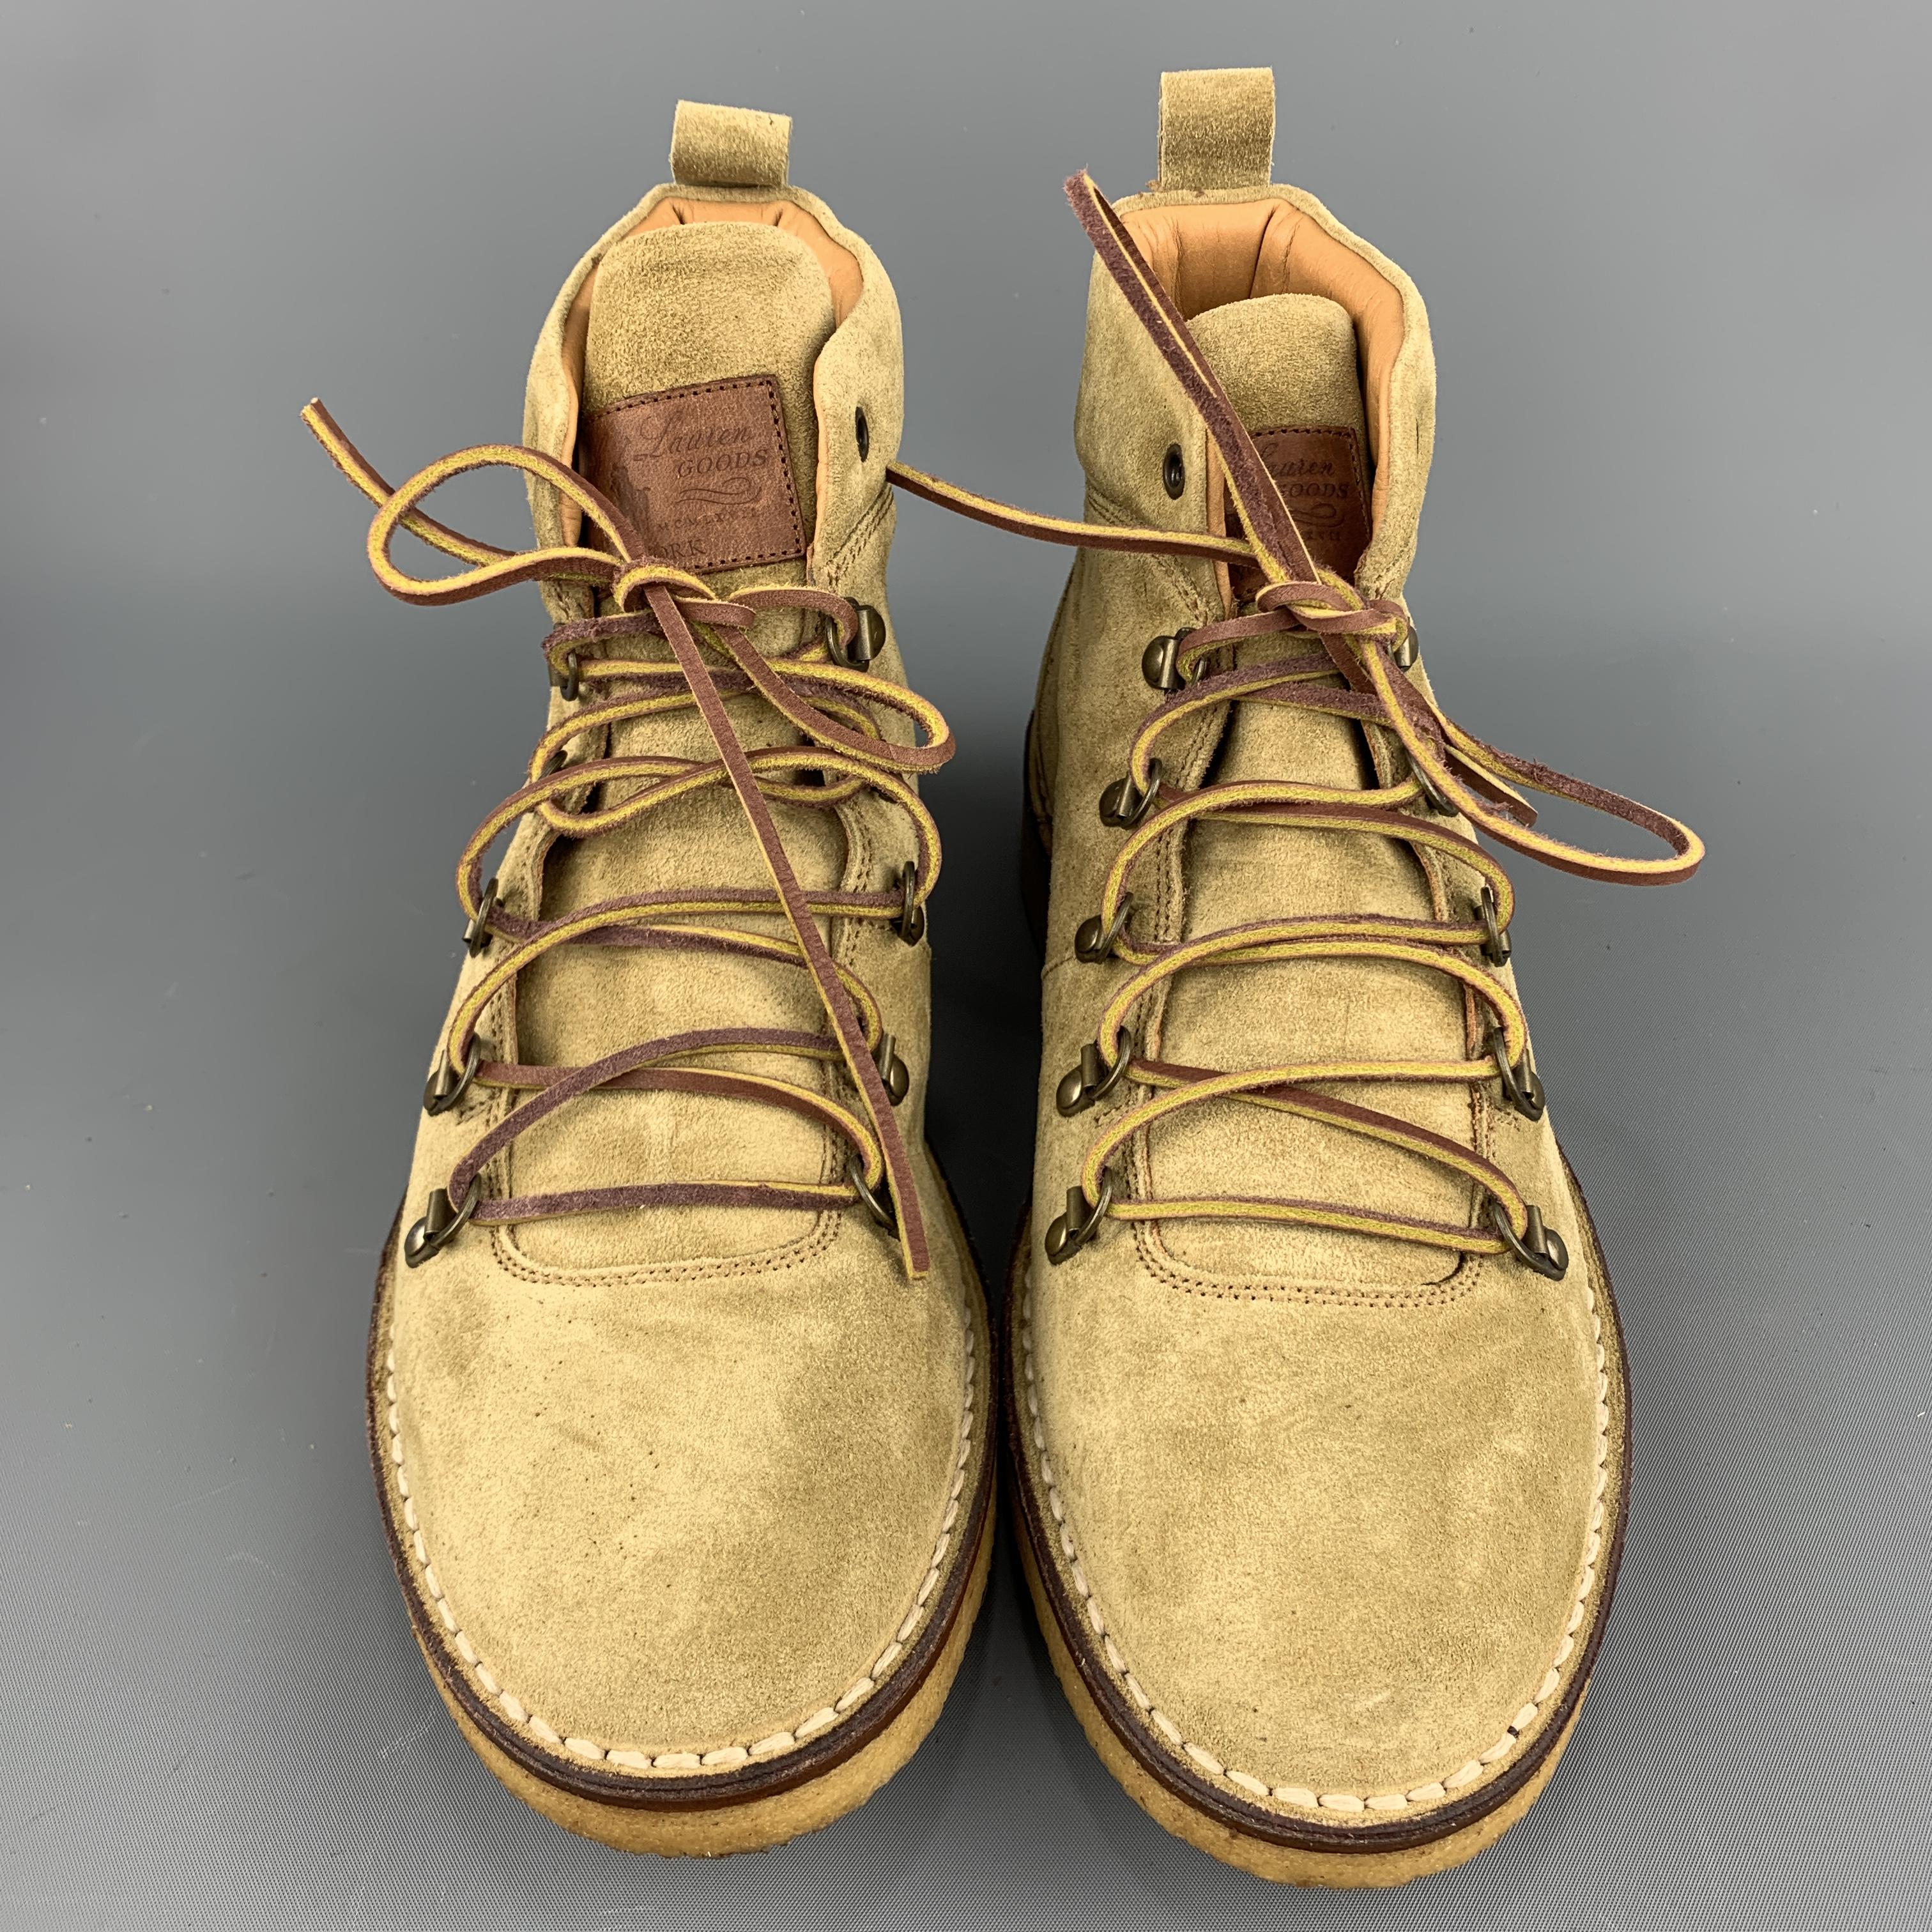 RALPH LAUREN boots come in khaki beige suede with ski hook lace up front and crepe sole. With box. Made in Italy.
 
Excellent Pre-Owned Condition.
Marked: 8 D
 
Outsole: 11.5 x 4.25 in.
Length: 4.5 in.